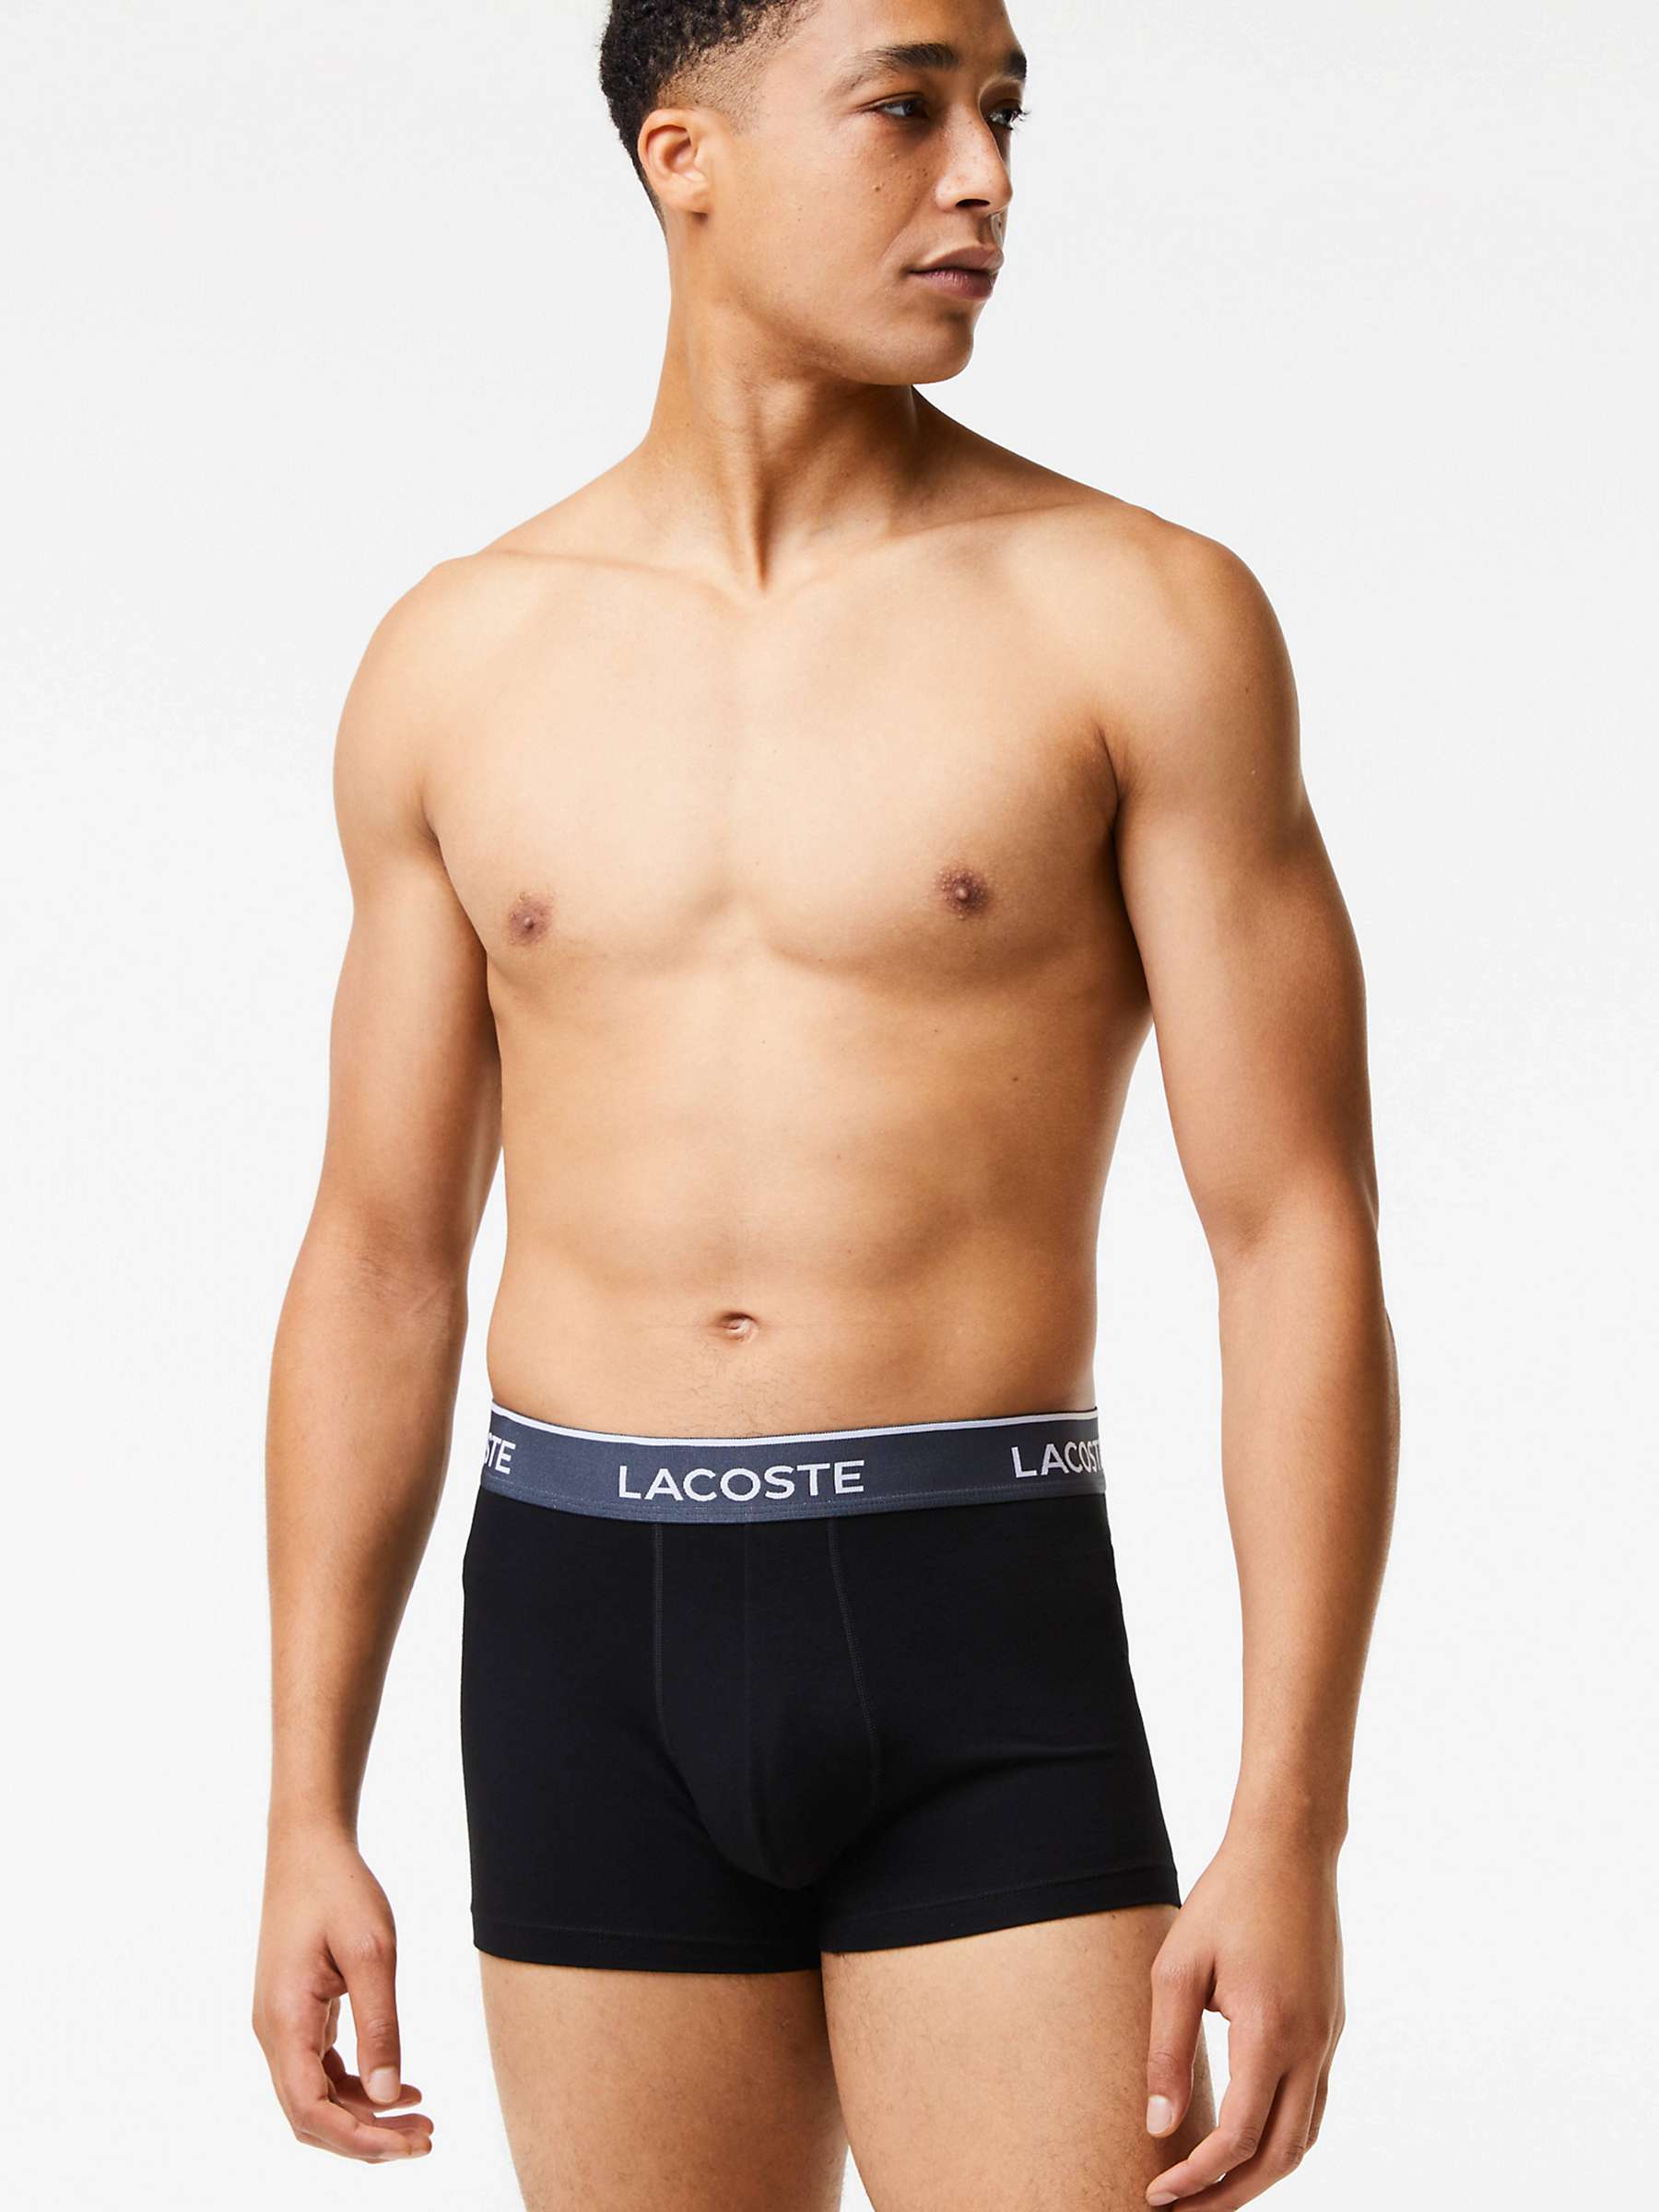 Buy Lacoste Contrast Waistband Trunks, Pack of 3 Online at johnlewis.com